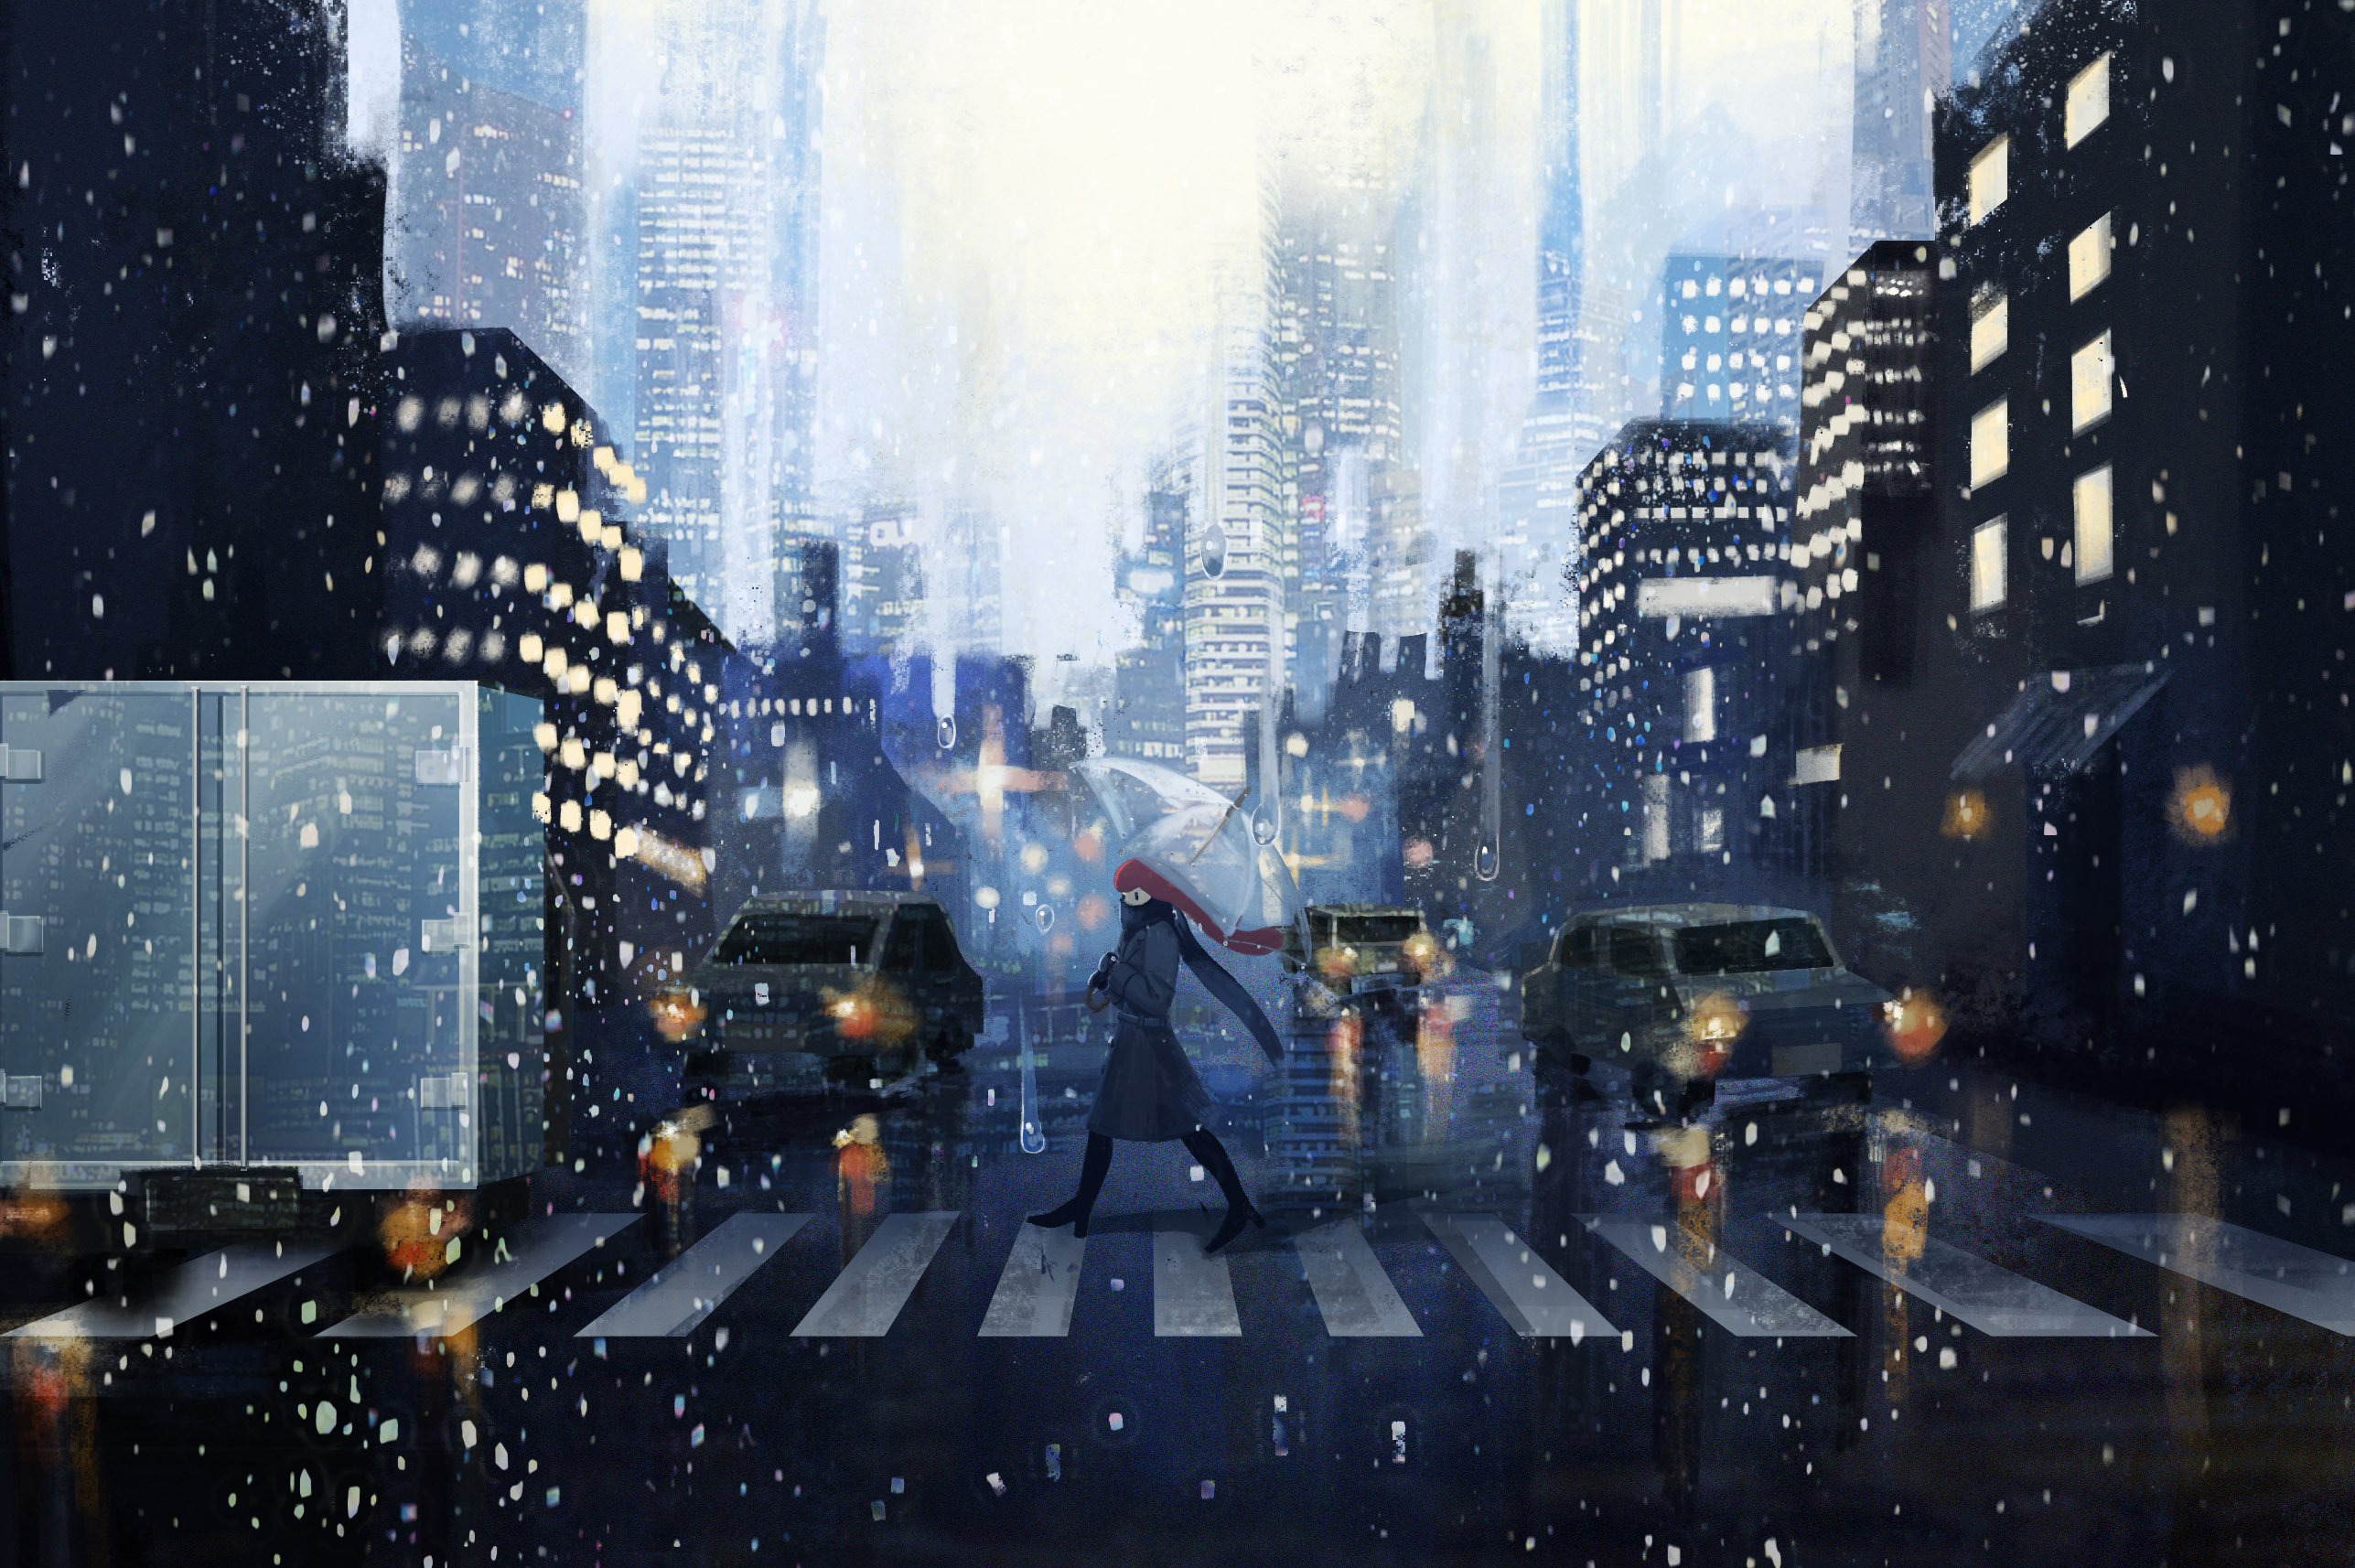 Anime Girl Crossing the Road in the Rain HD Wallpaper | Background